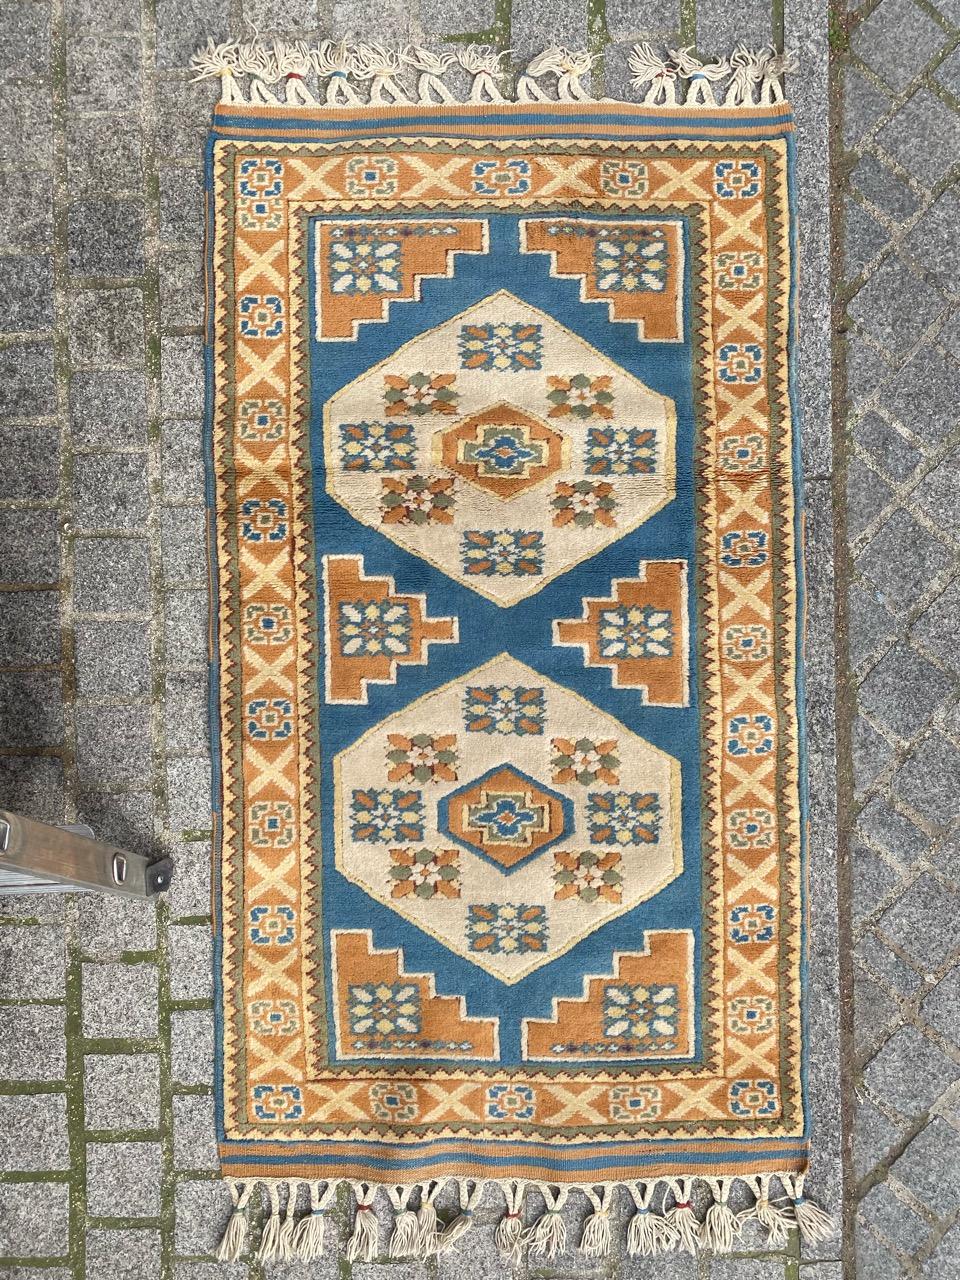 Exquisite Turkish rug from the late 20th century, meticulously handwoven with wool on wool, featuring intricate geometric designs. The central field boasts two geometric white medallions on a sky-blue background with vibrant orange motifs. It is